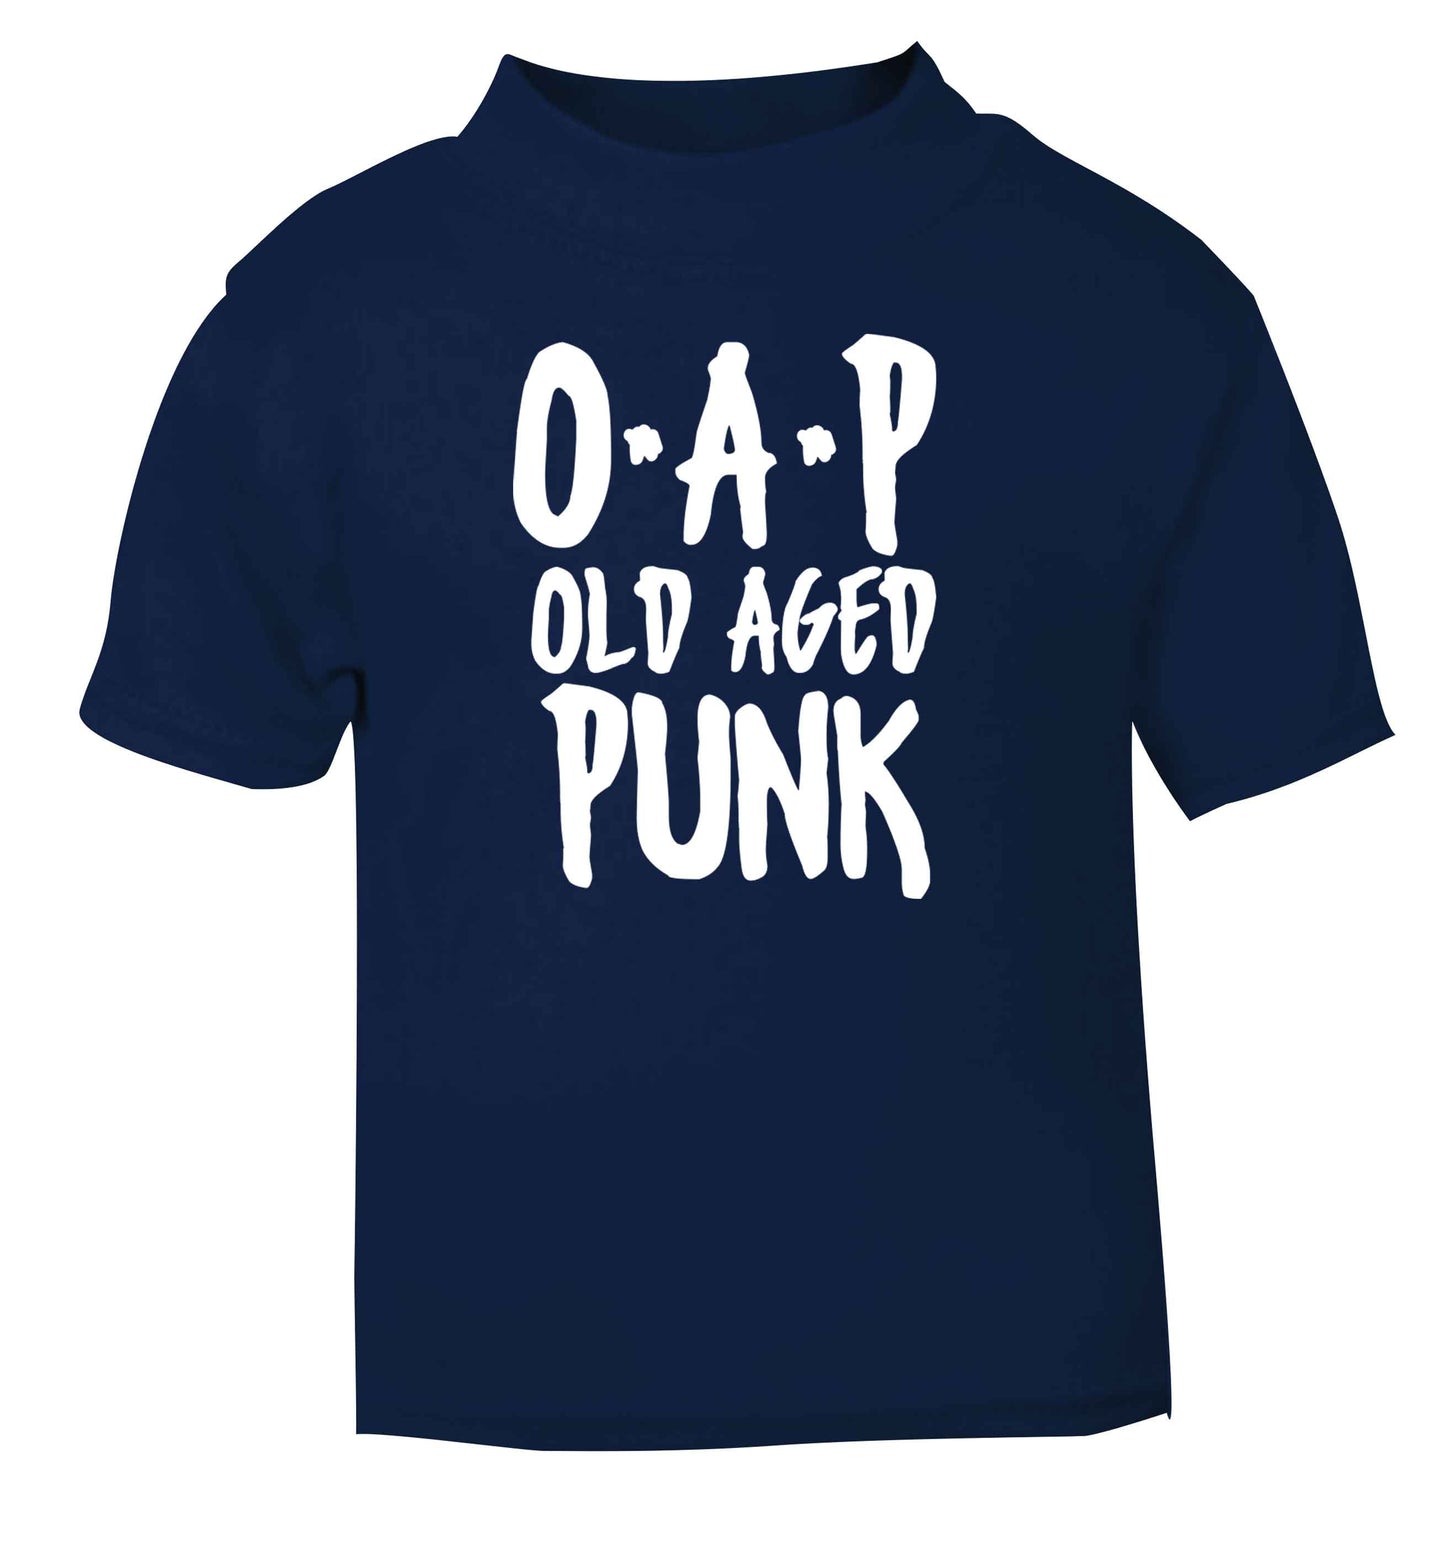 O.A.P Old Age Punk navy Baby Toddler Tshirt 2 Years